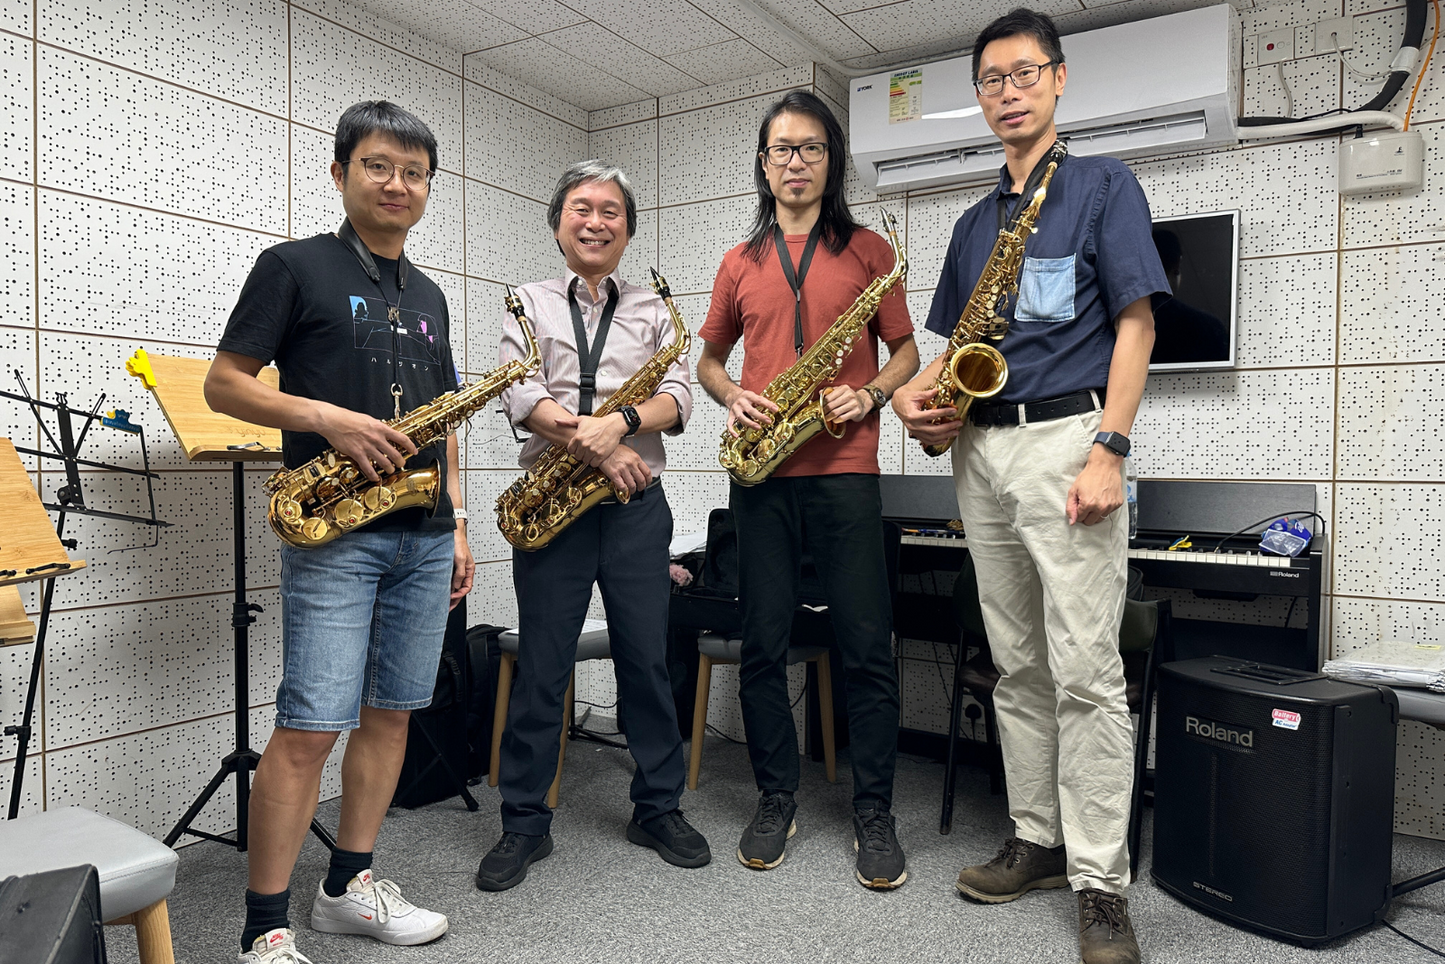 【Saxophone Lesson】Learning Class on Saxophone course (Mong Kok)